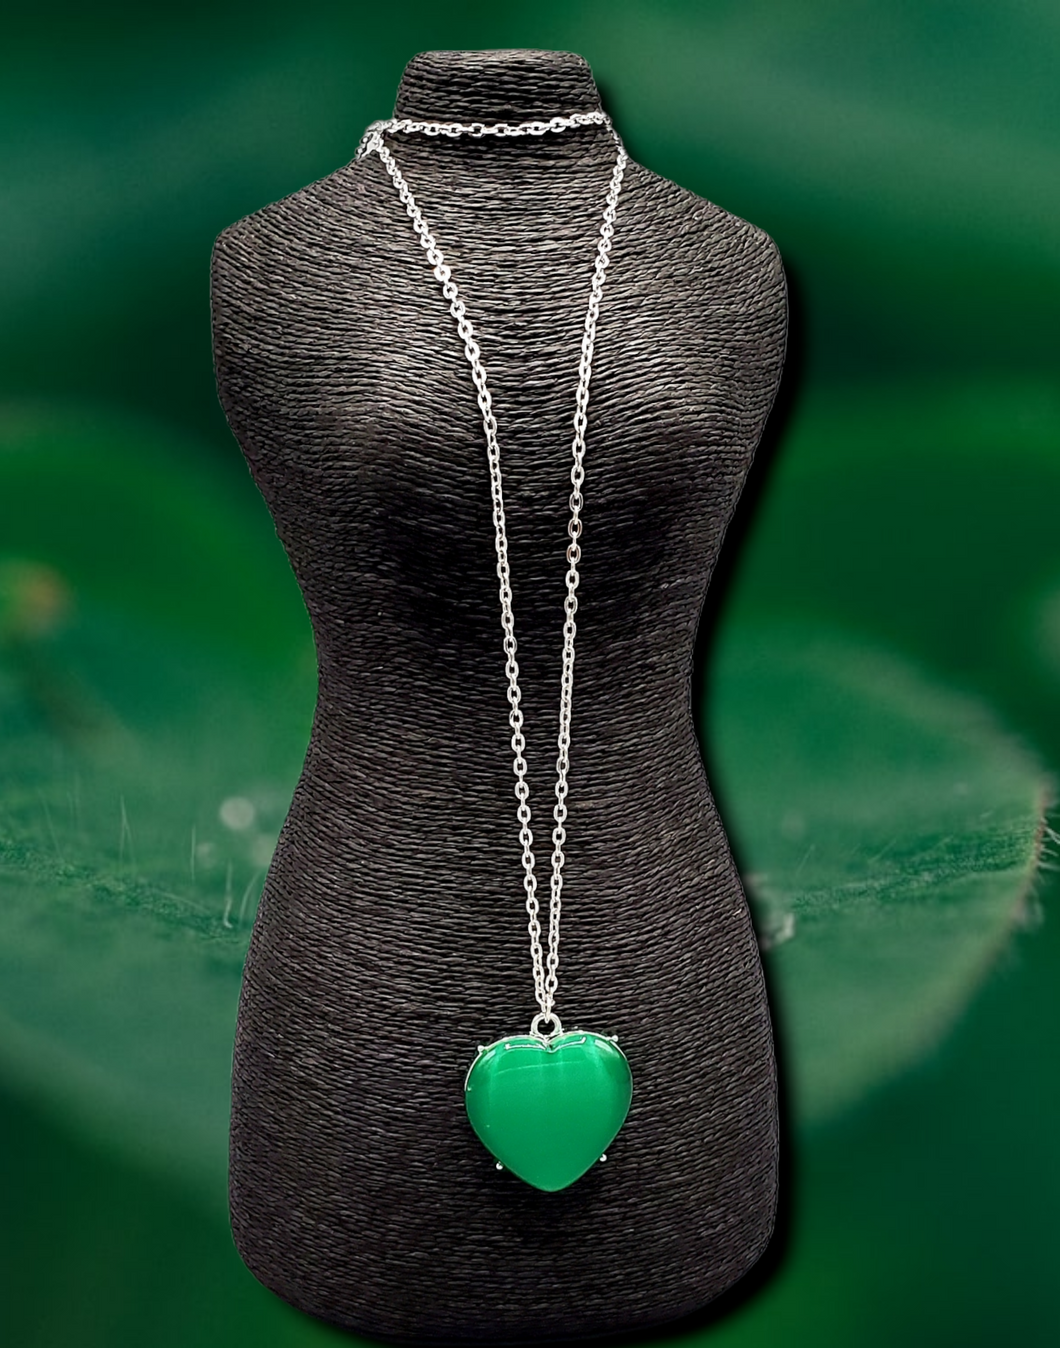 Hearted Glow Green Necklace and Earrings